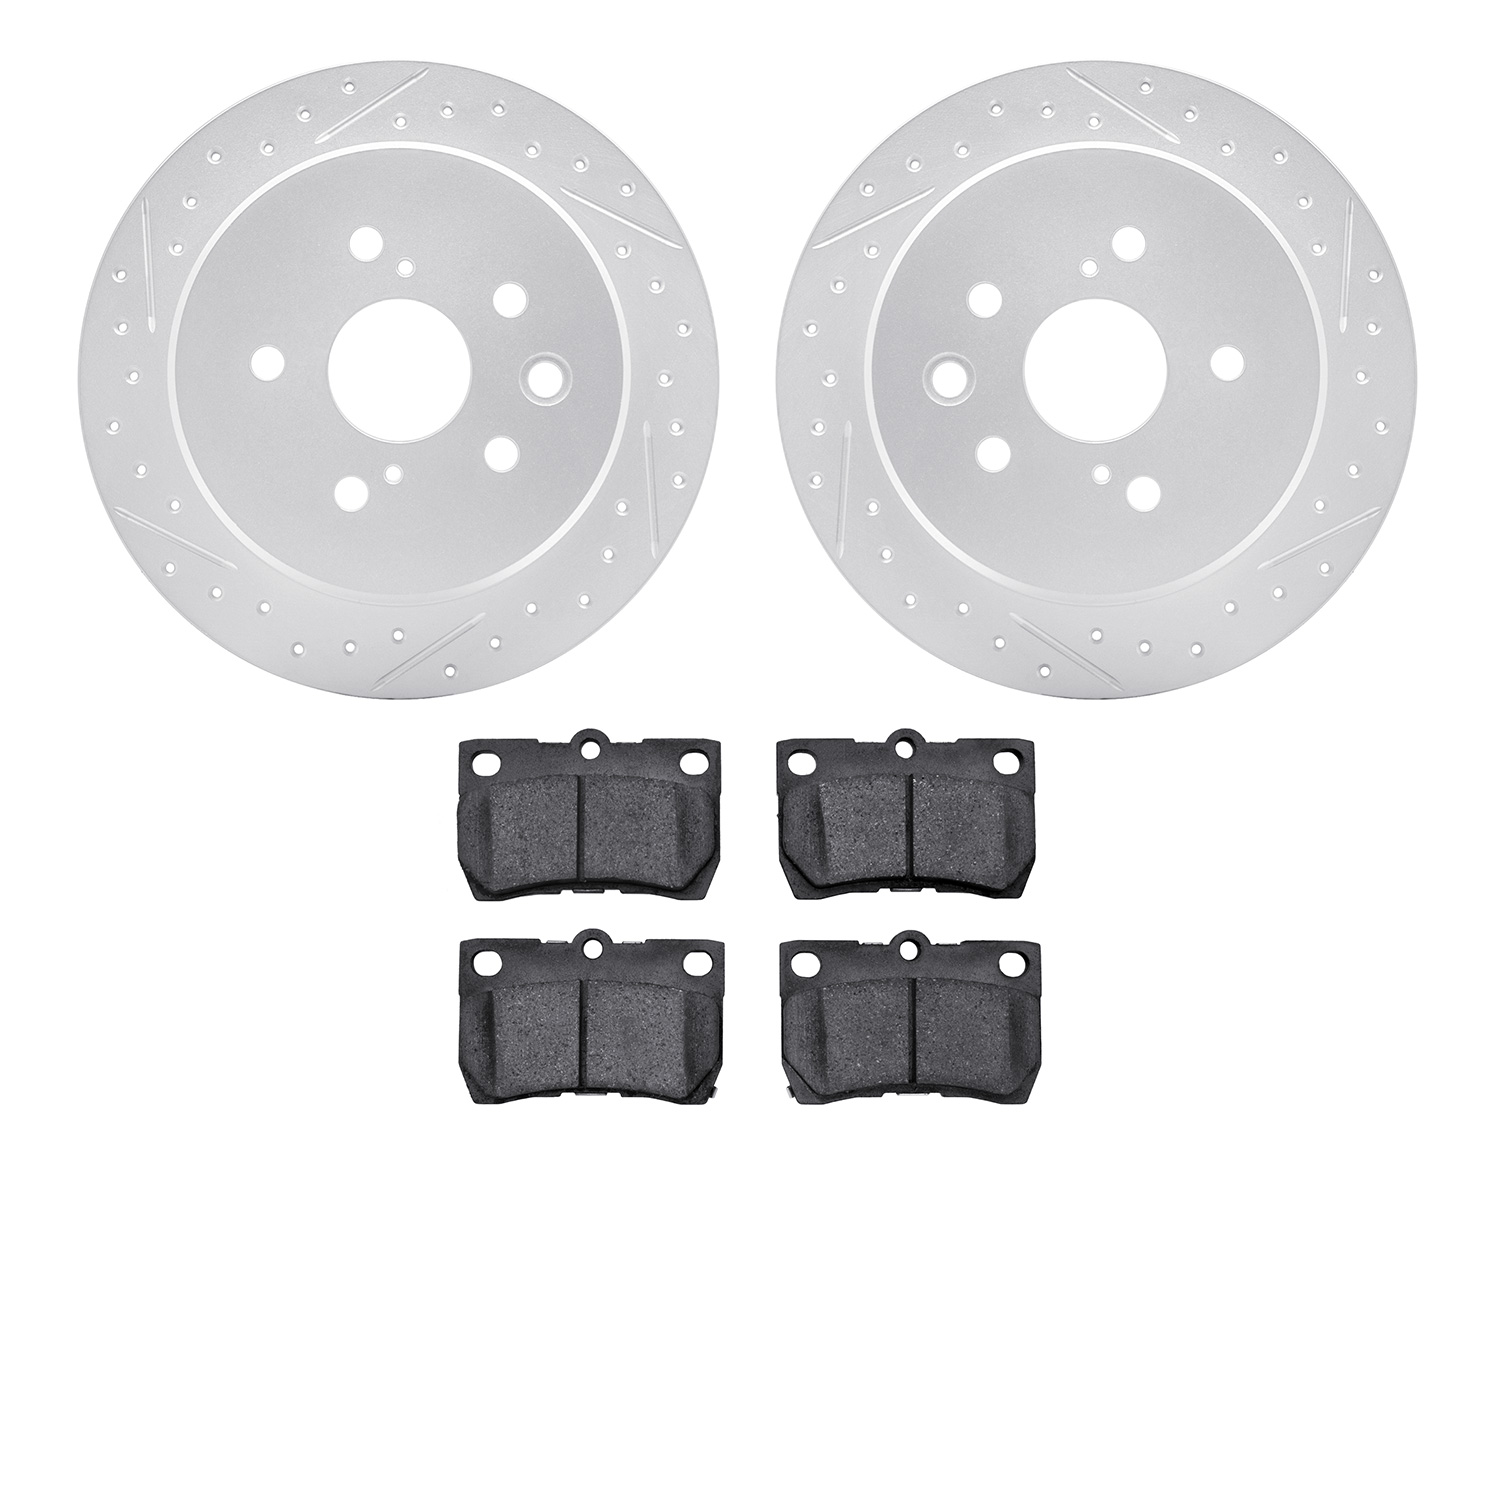 2502-75012 Geoperformance Drilled/Slotted Rotors w/5000 Advanced Brake Pads Kit, 2006-2013 Lexus/Toyota/Scion, Position: Rear